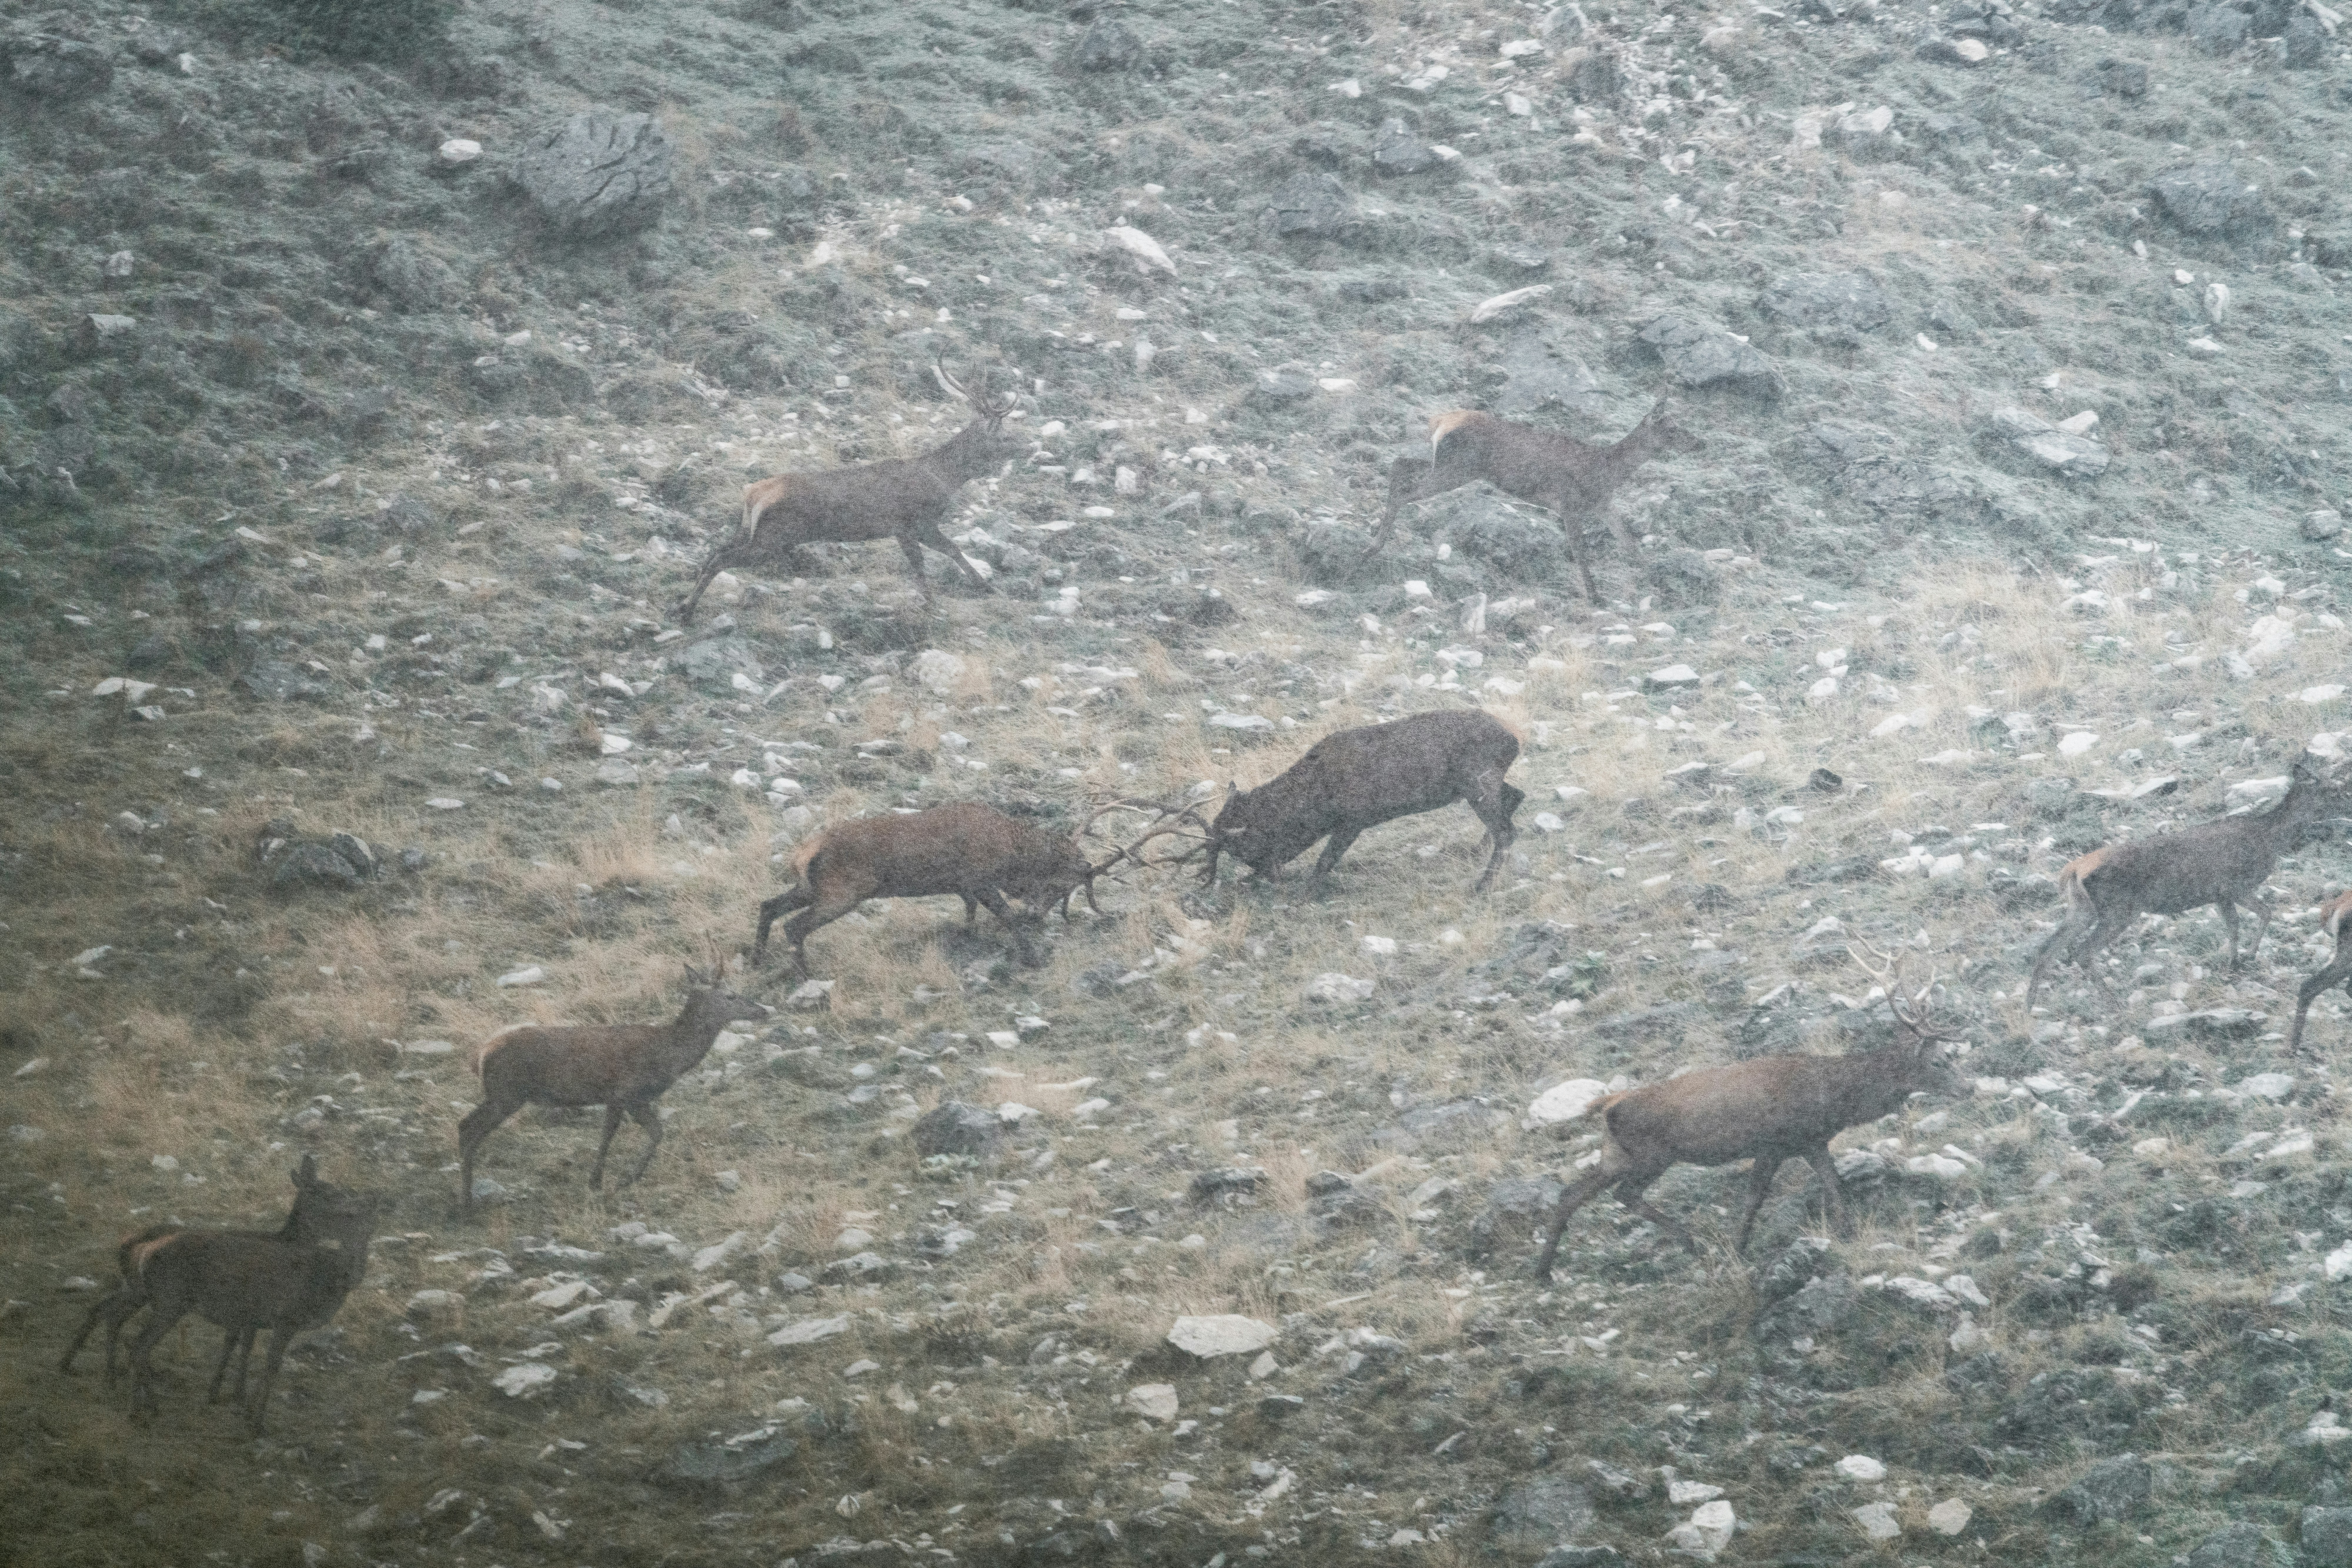 brown goats on gray ground during daytime